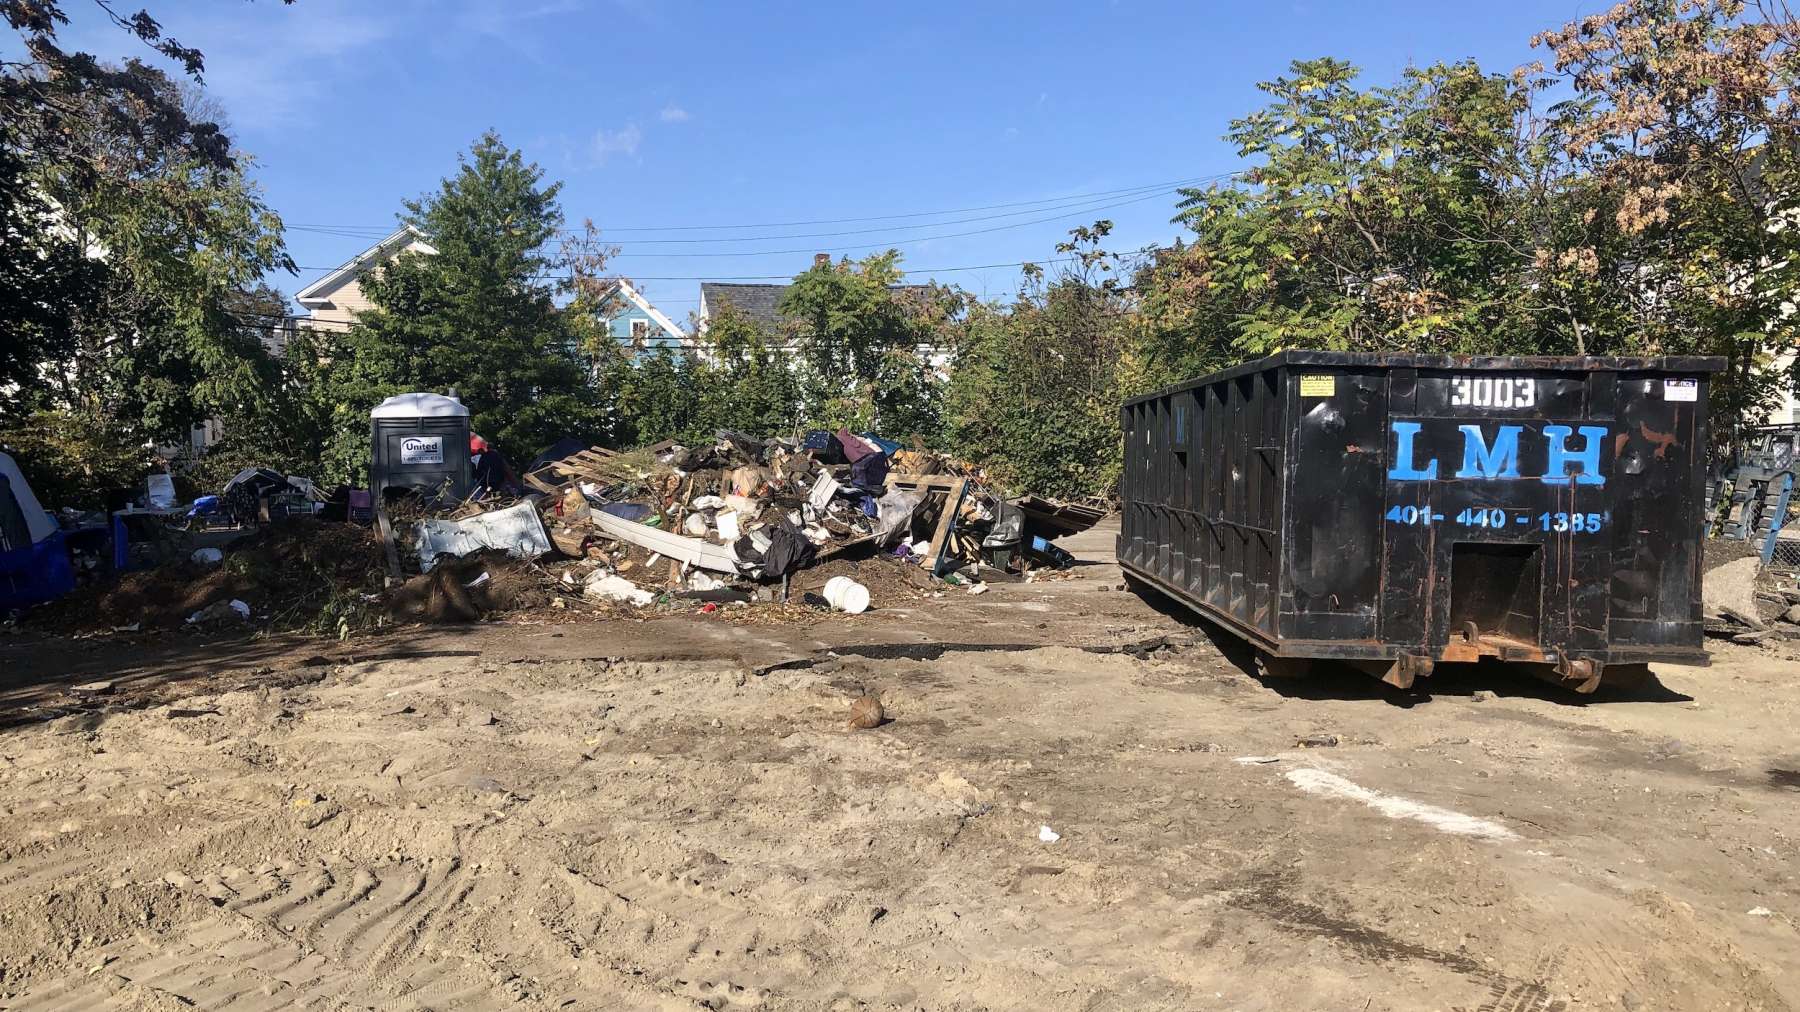 Rhode Island News: City officials surprised as unhoused encampment on Wilson St is half bulldozed by developer Knight & Swan